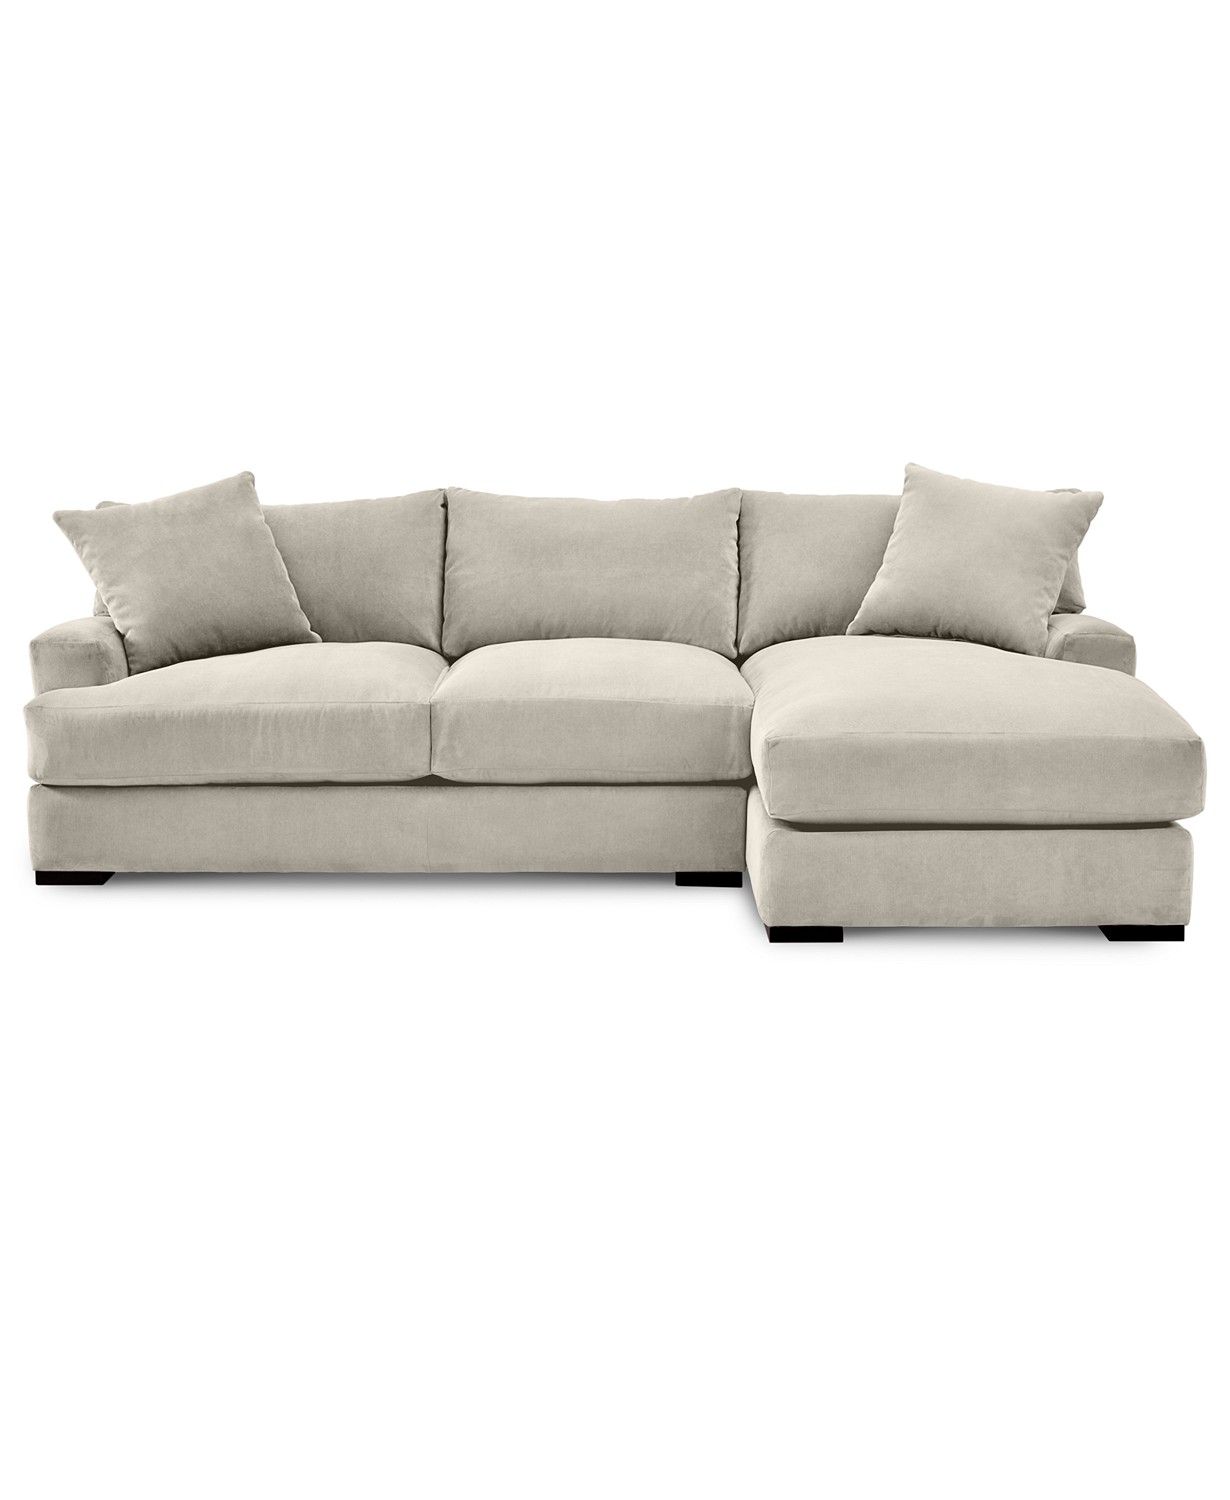 Top Picks for Macy’s Sectional Sofas in
2024